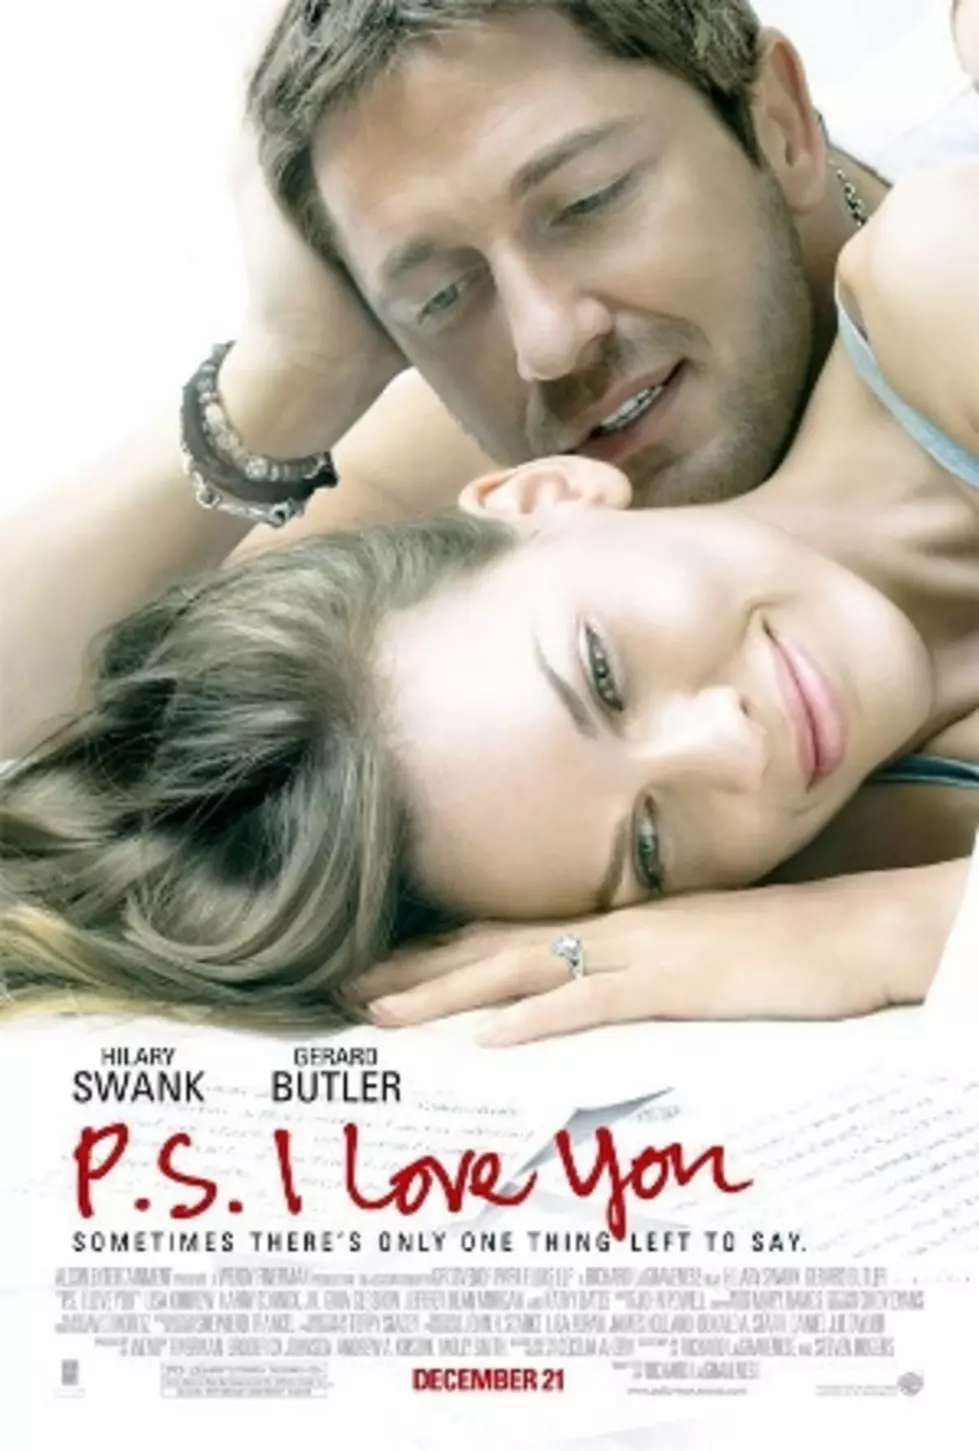 Watch ‘P.S. I Love You’ At The Pines Theater For A Good Cause